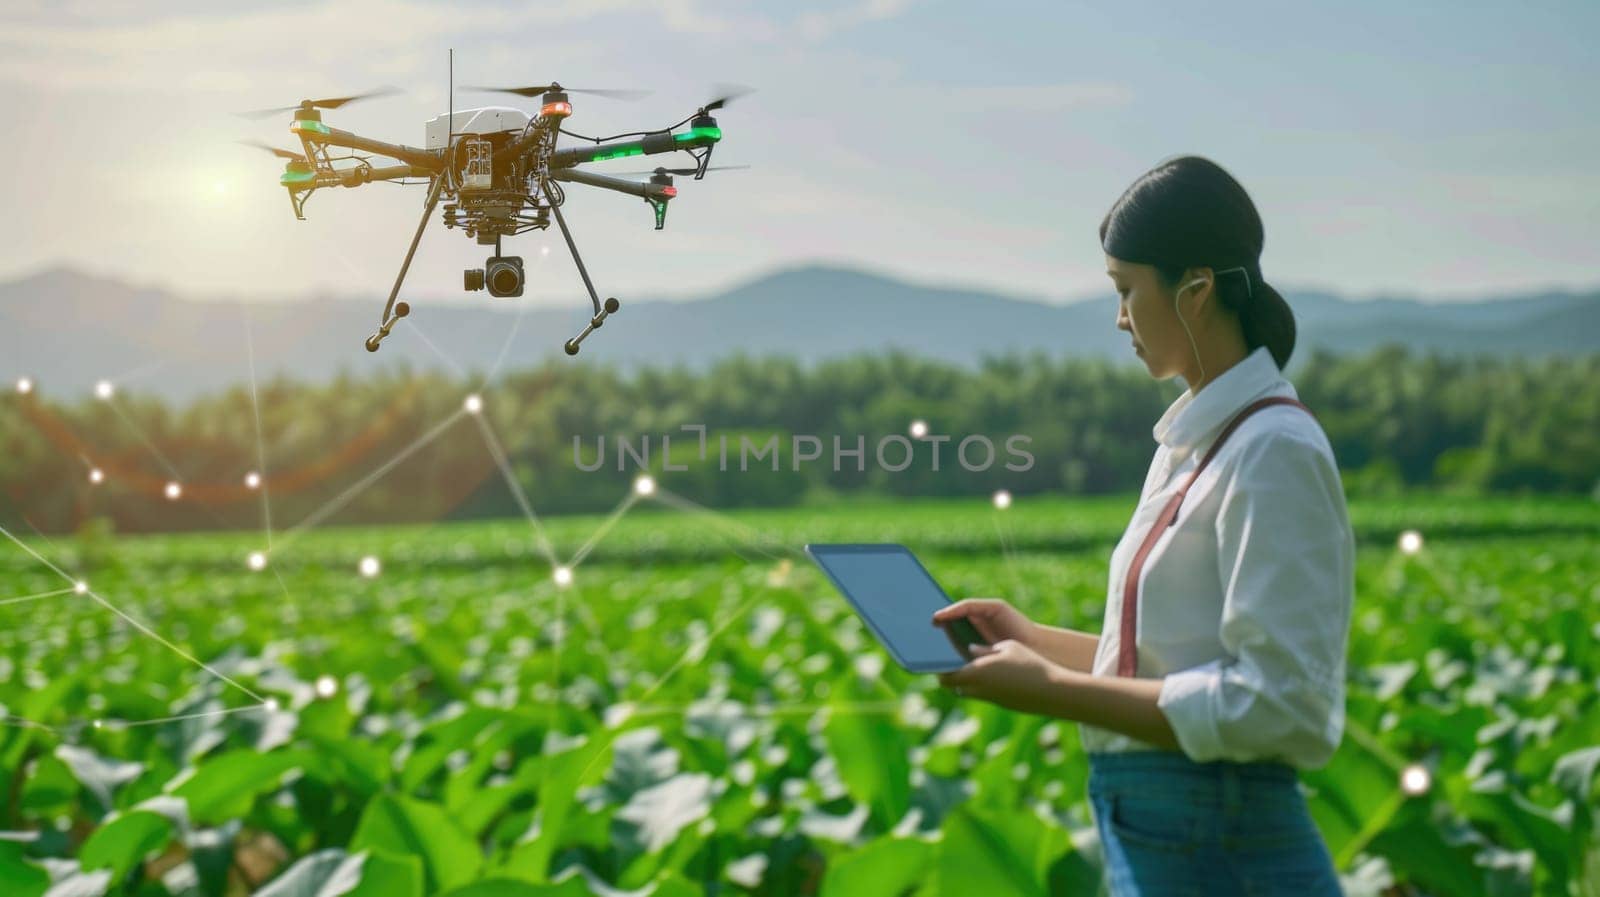 A woman is operating an aircraft in a grassy field, controlling it with a tablet amidst a beautiful natural landscape. AIG41